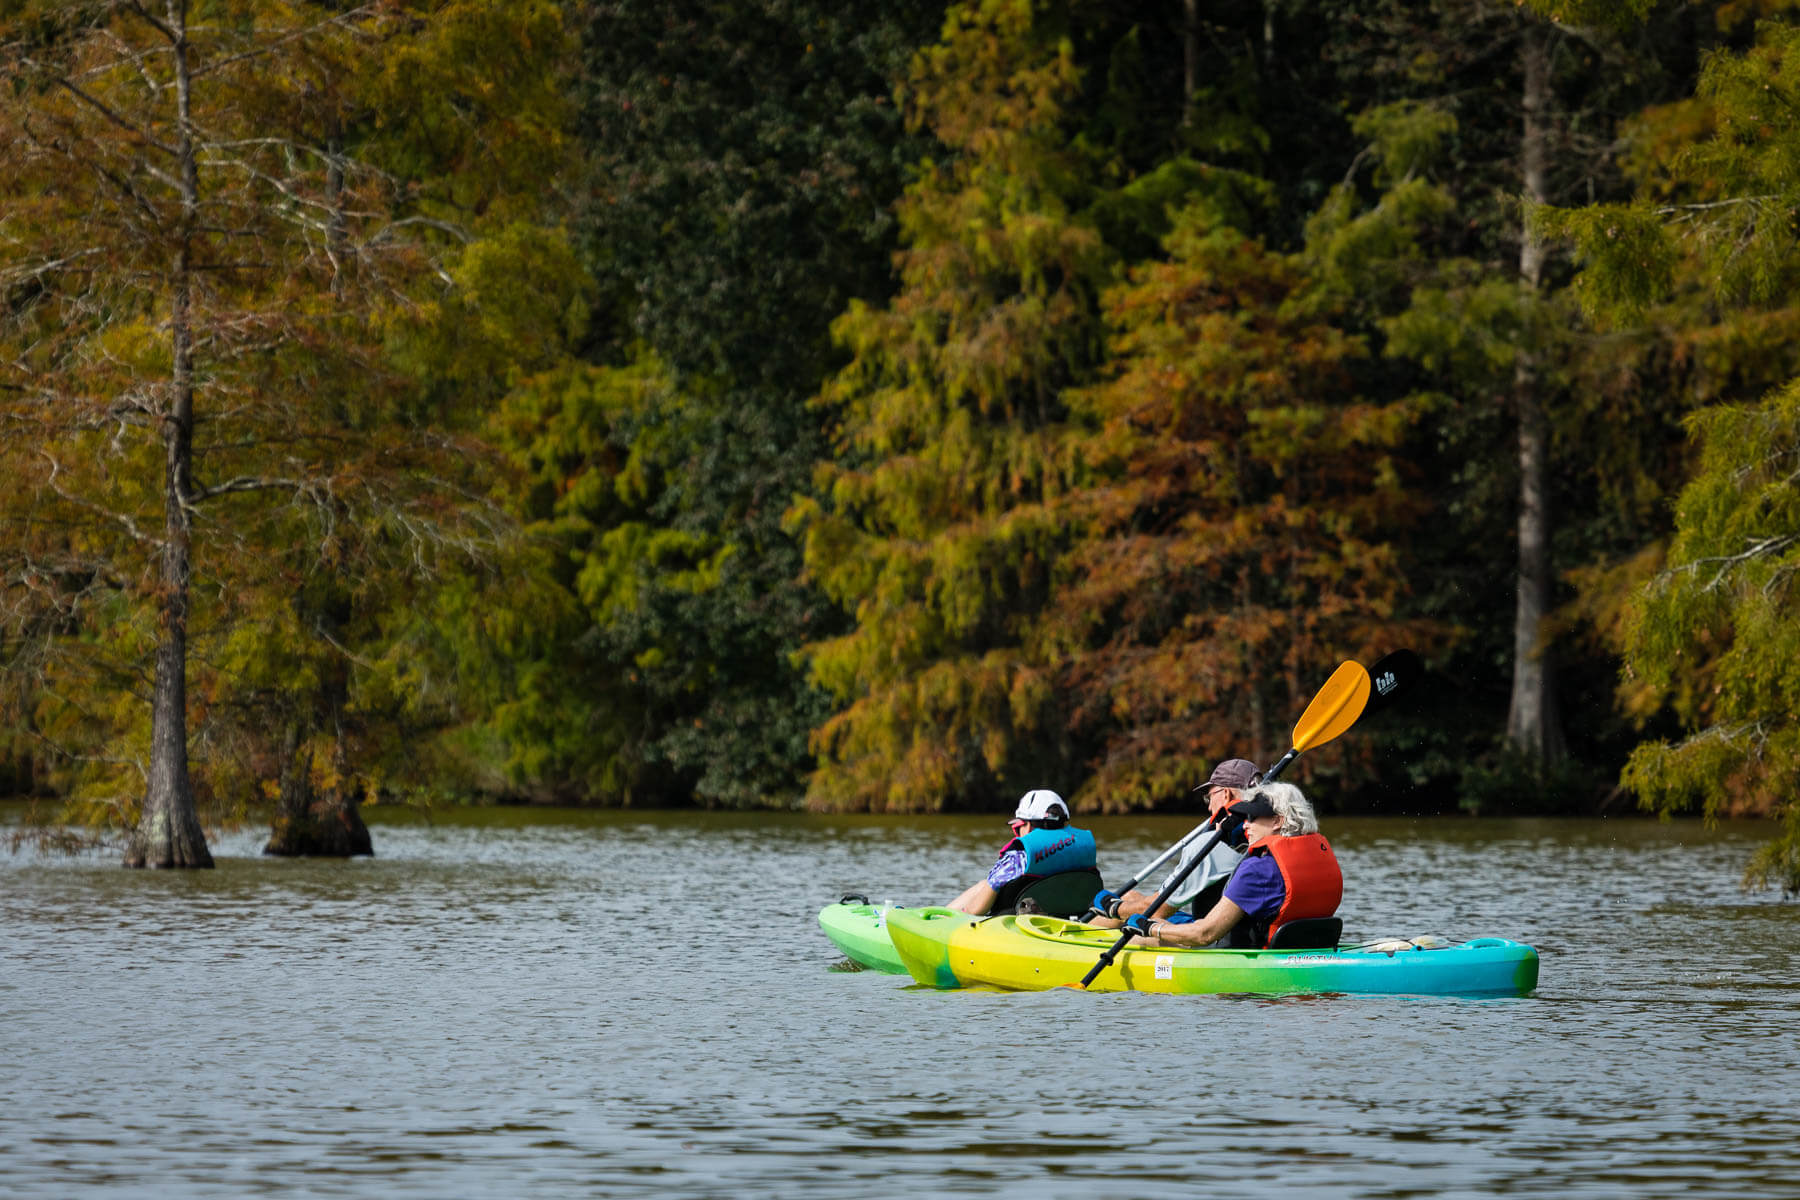 Two kayaks move down water surrounded by trees.